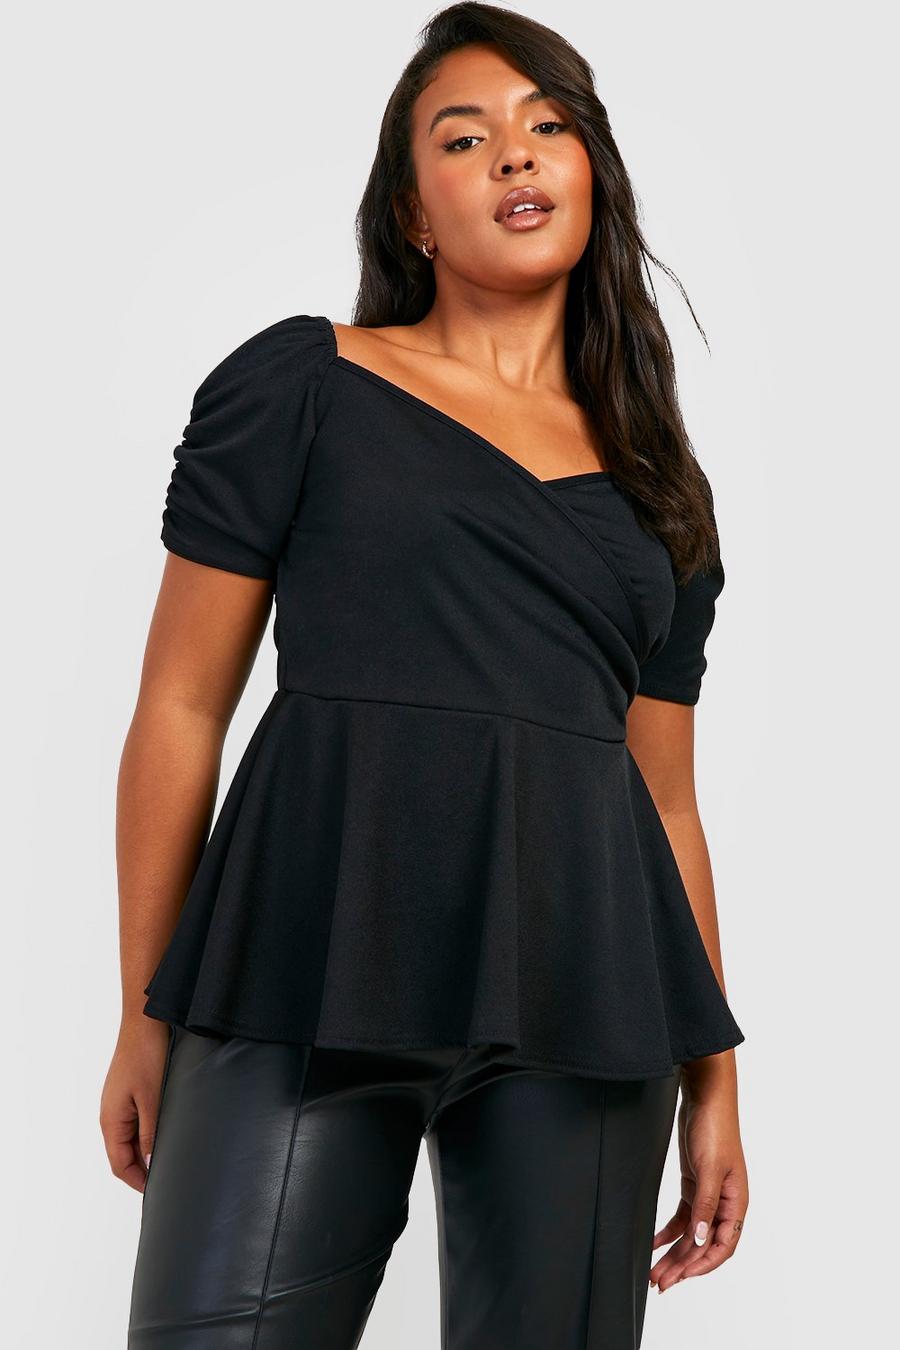 Plus Size Going Out Tops | Plus Going Out Tops | boohoo UK